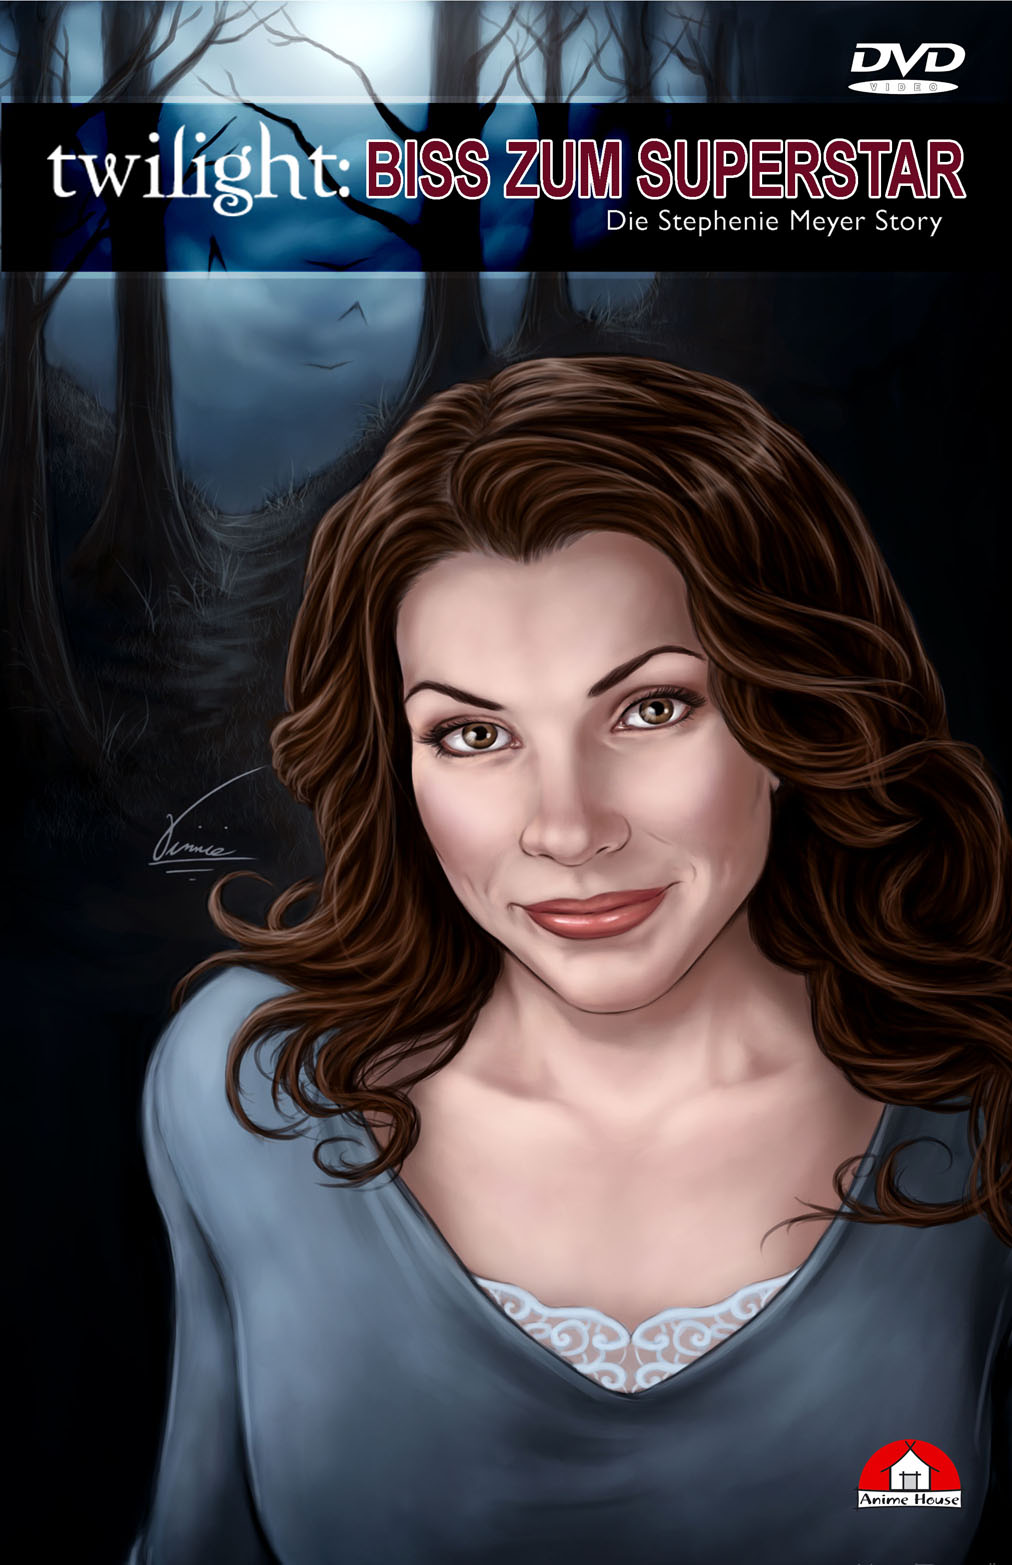 Vancouver's Bluewater turns Stephenie Meyer into a comic book hero